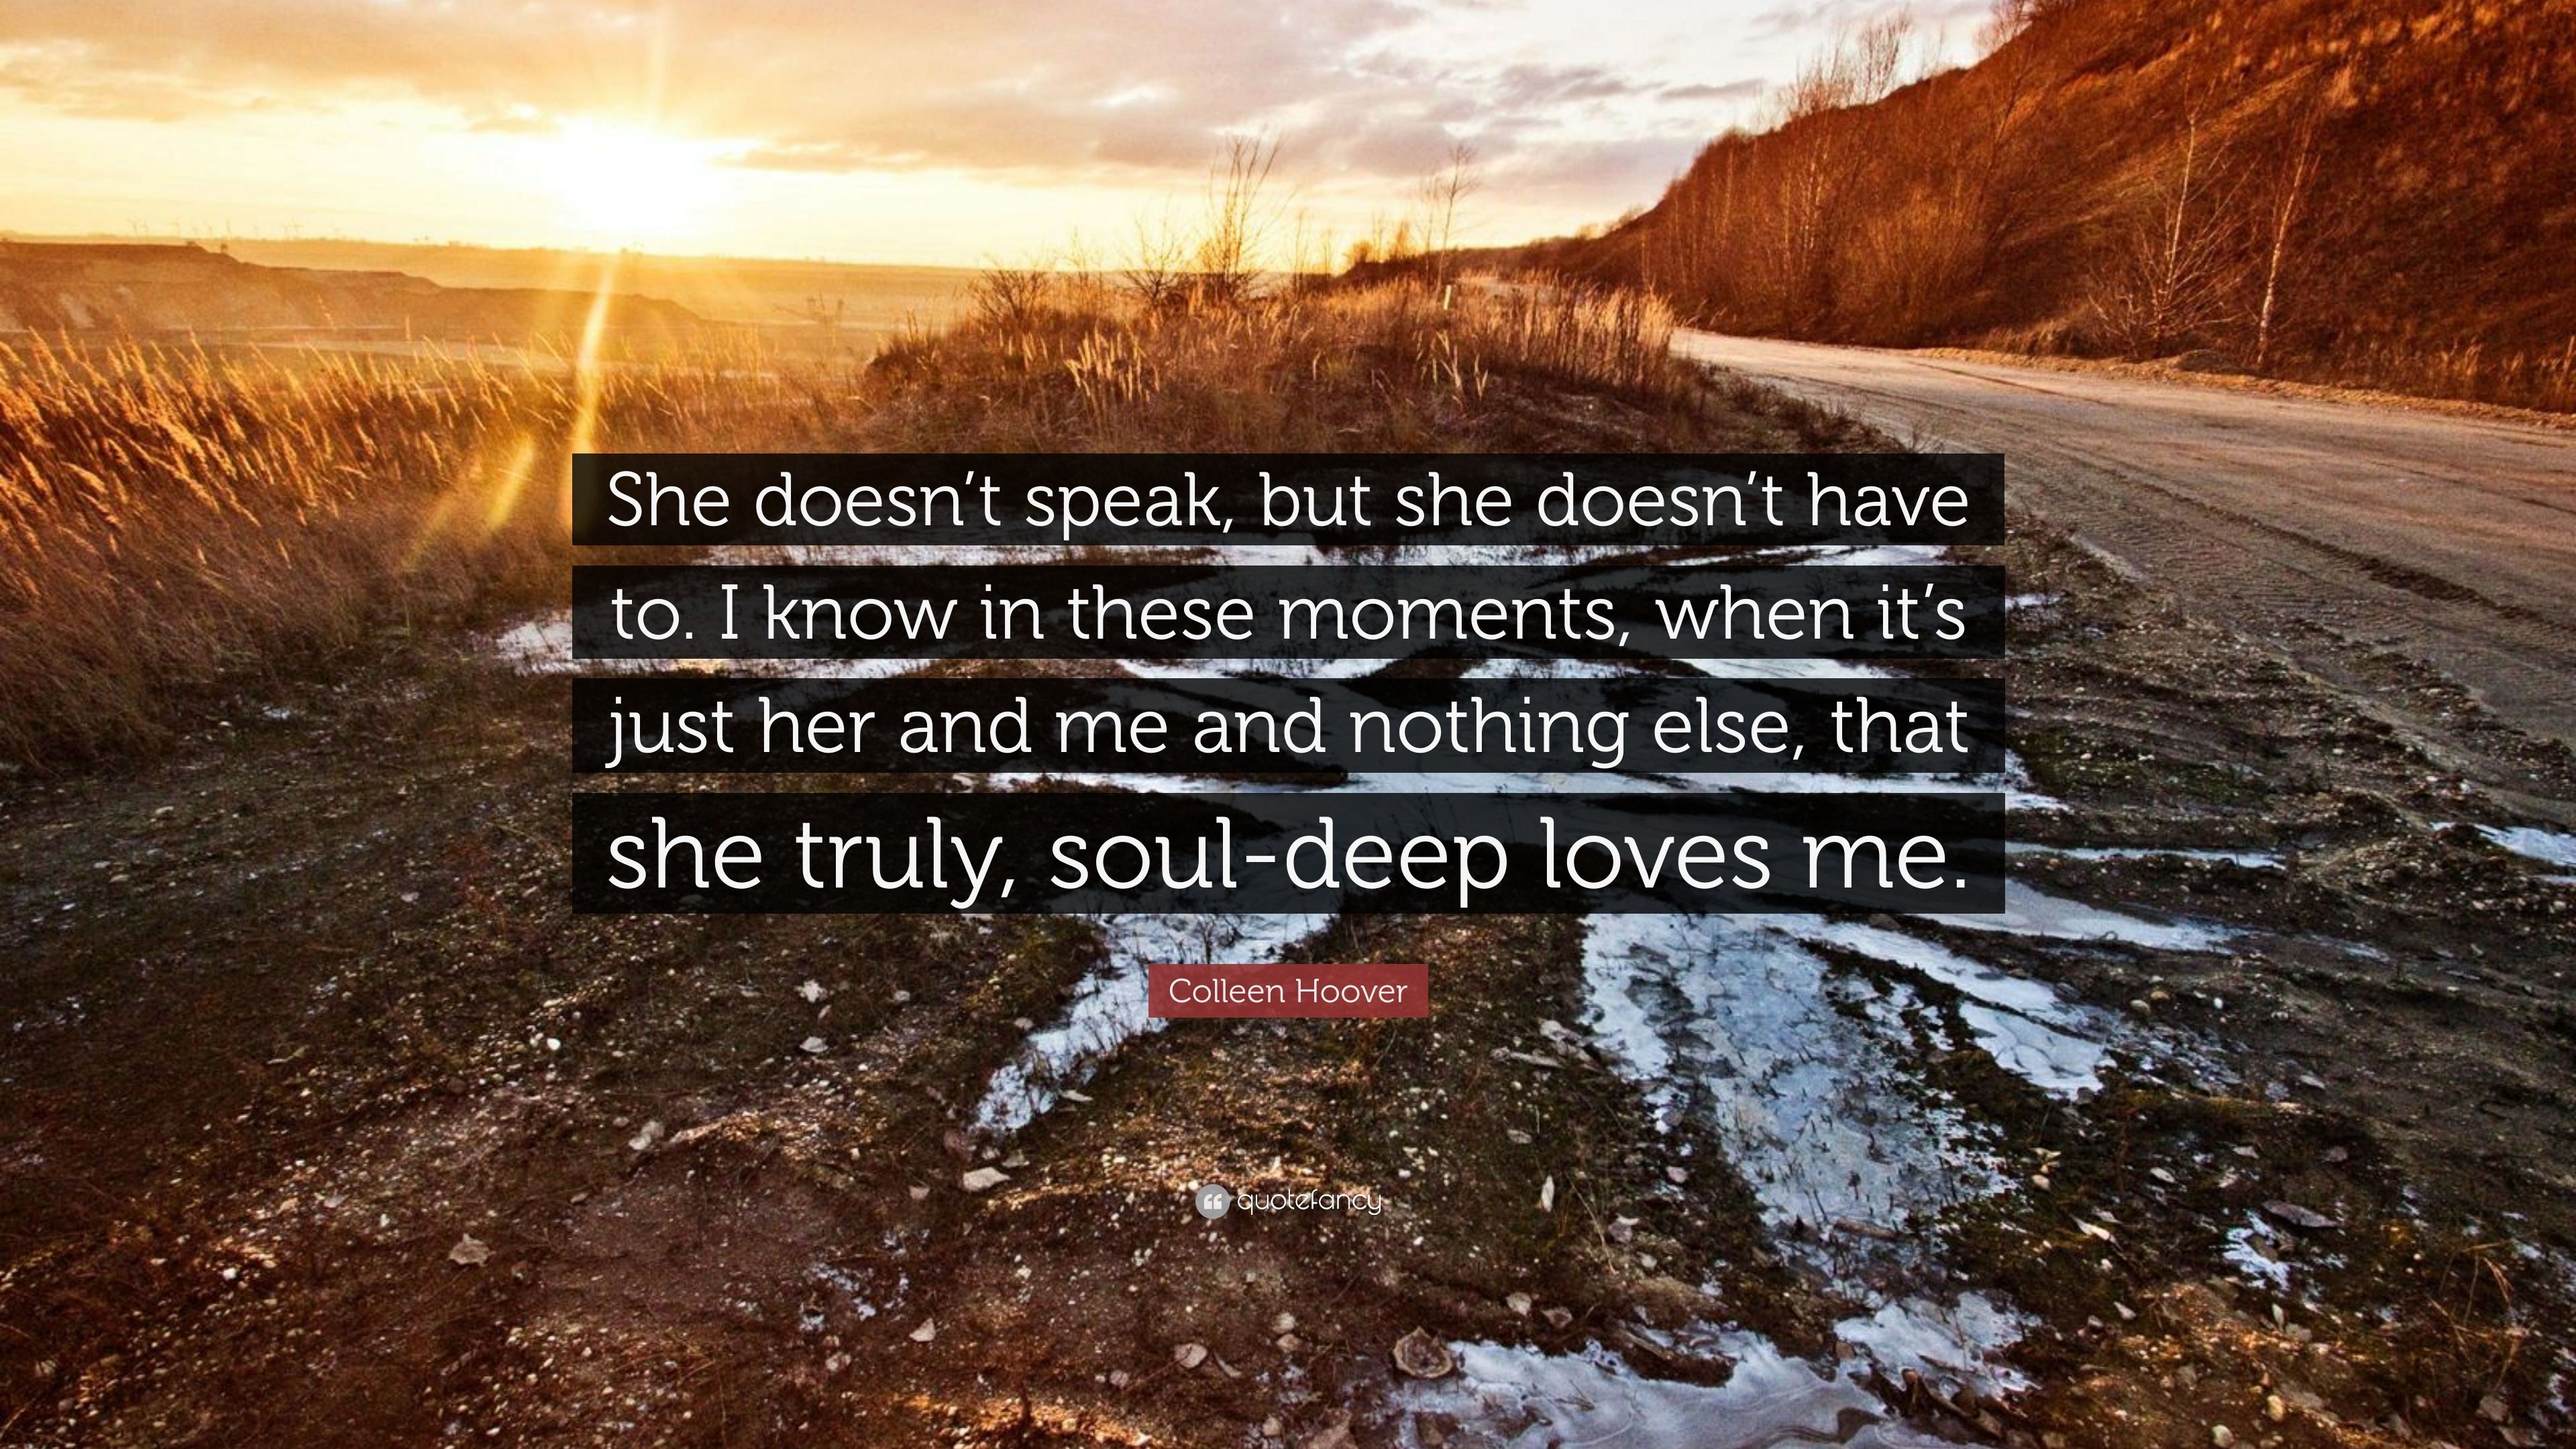 Colleen Hoover Quote She Doesn T Speak But She Doesn T Have To I Know In These Moments When It S Just Her And Me And Nothing Else That Sh